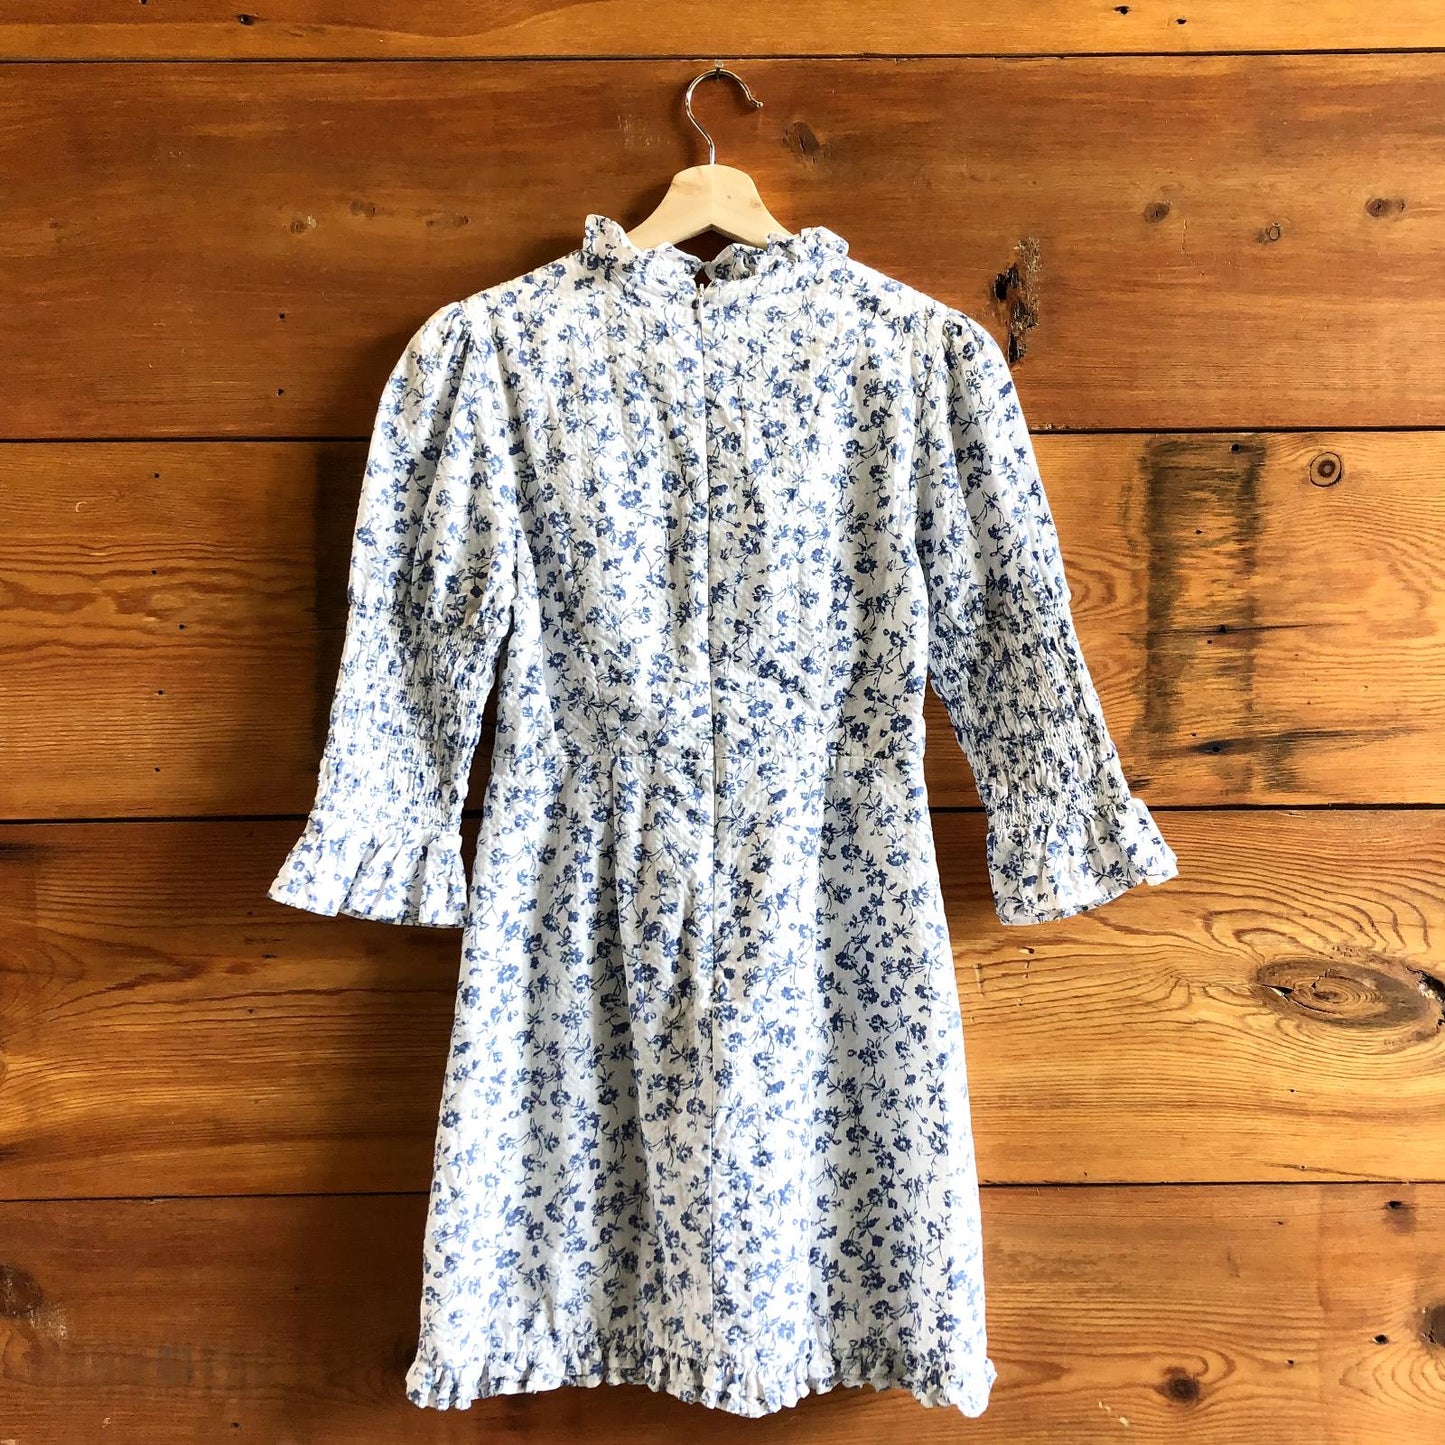 S - Laura Ashley X Urban Outfitters White Blue Floral Print Mini Dress 0425GN